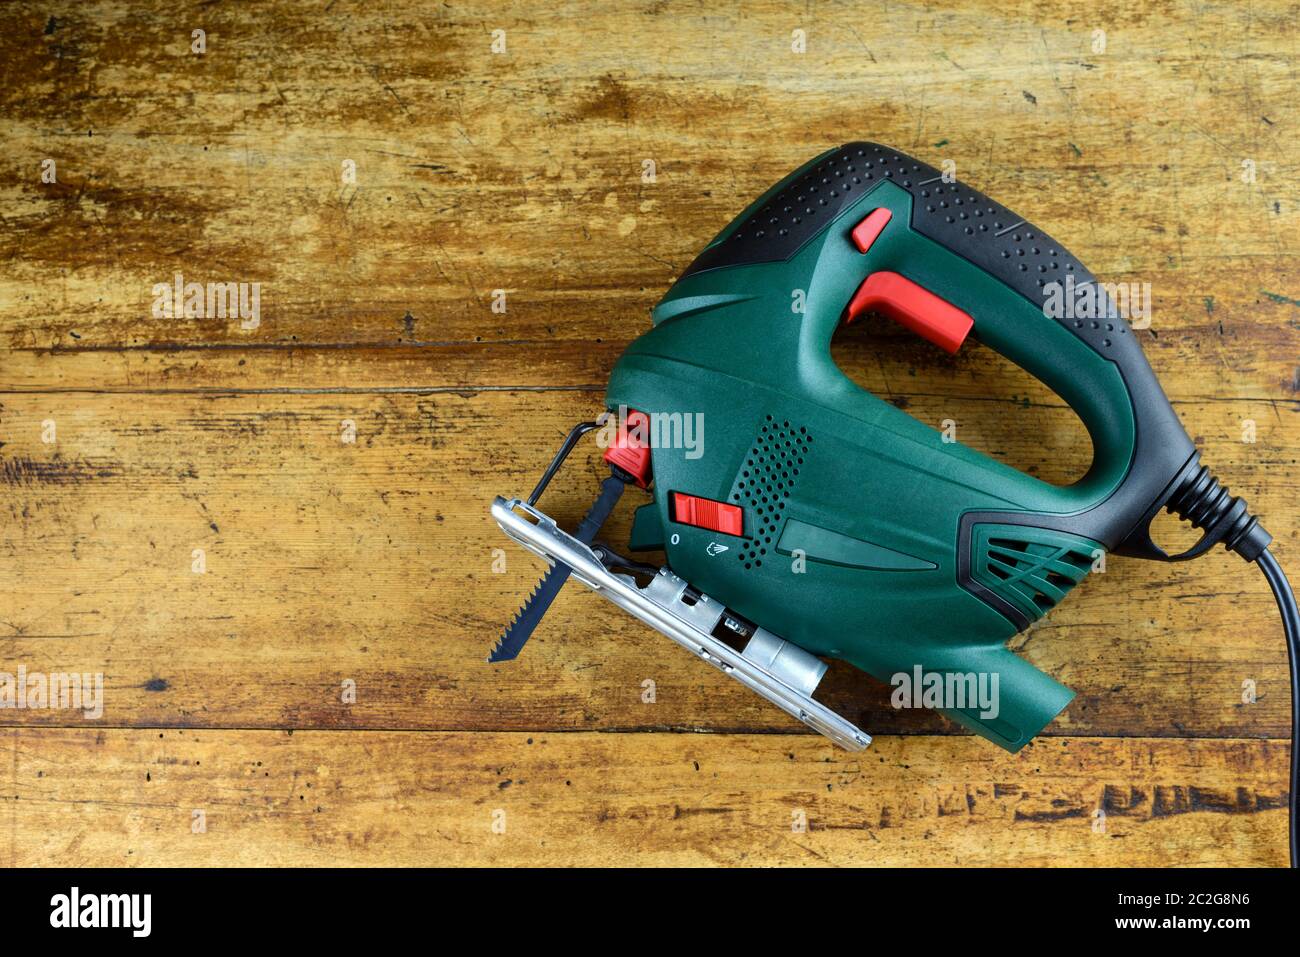 A jigsaw power tool on vintage wooden background with copy space for text. Stock Photo